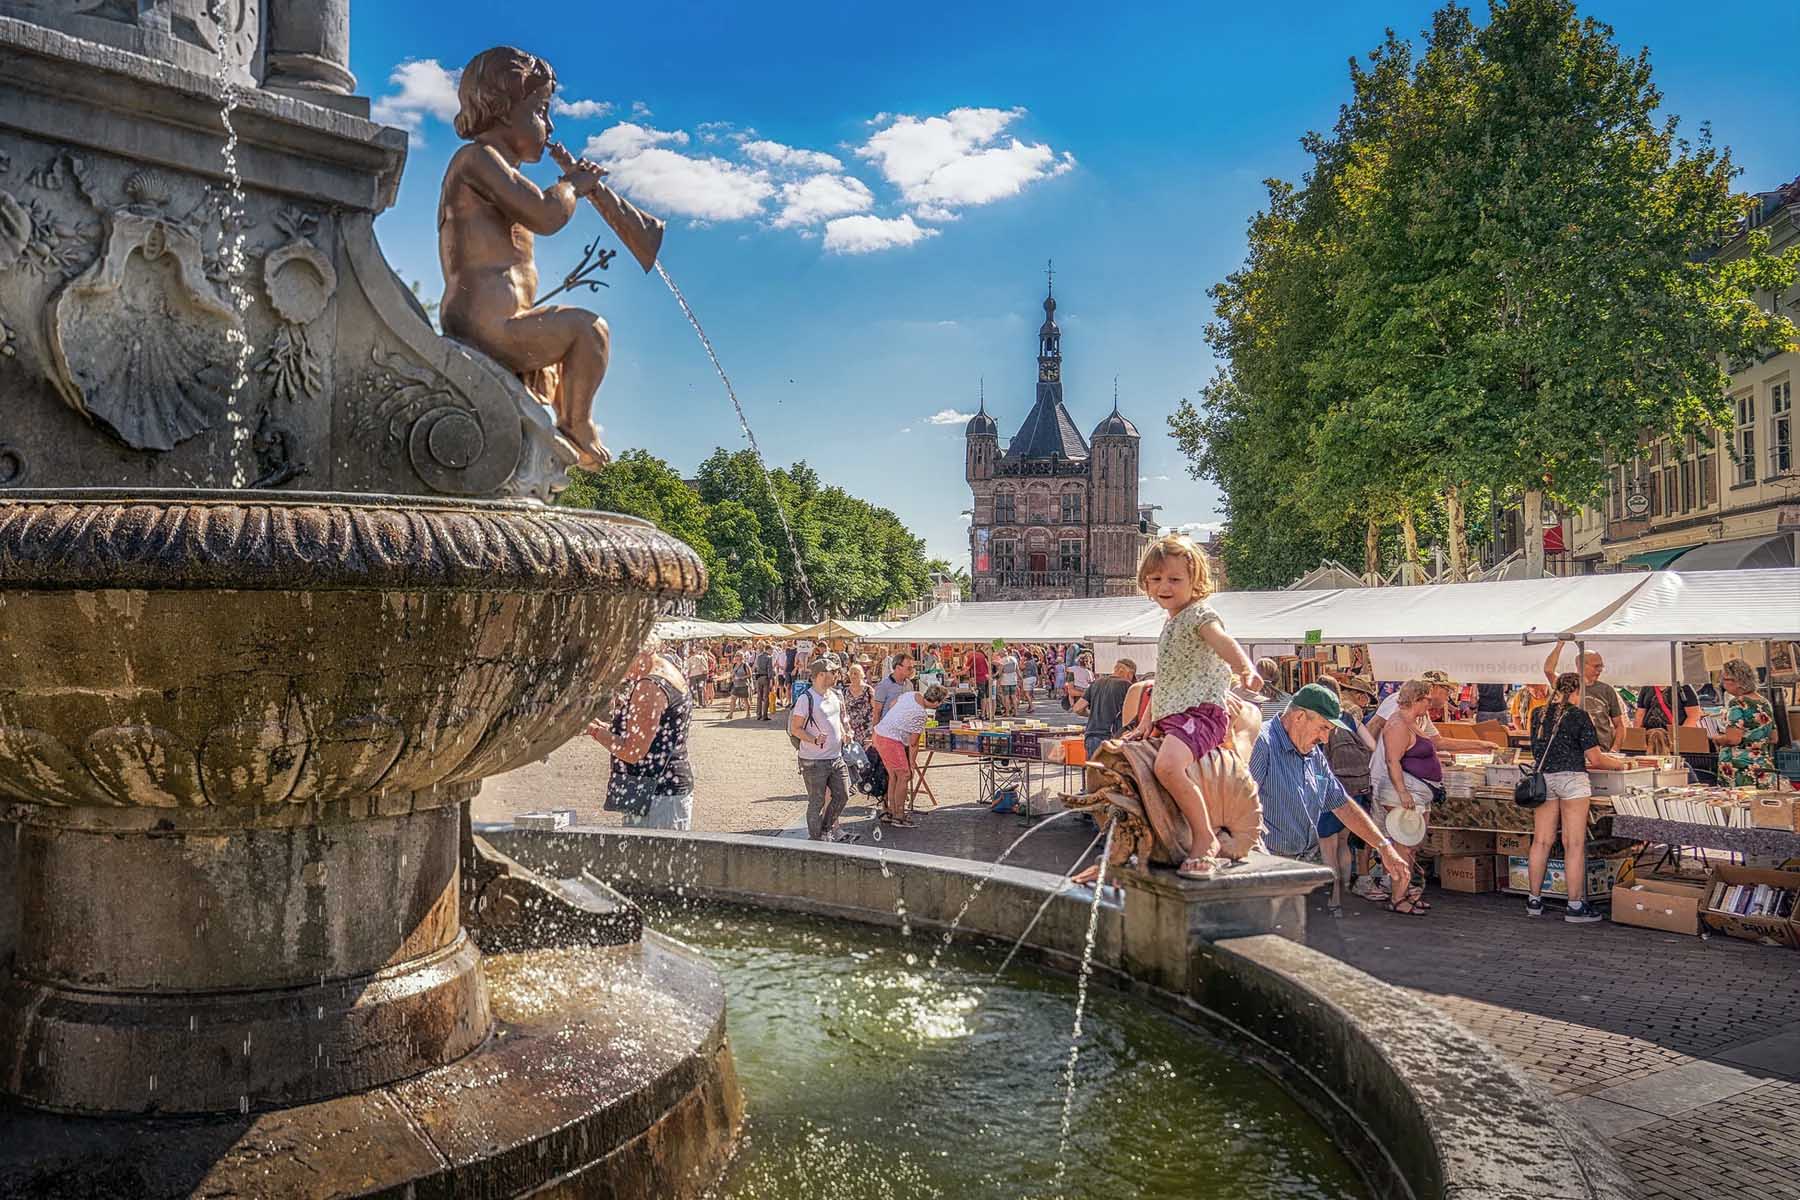 Dutch child playing in a fountain on the square in Deventer city center